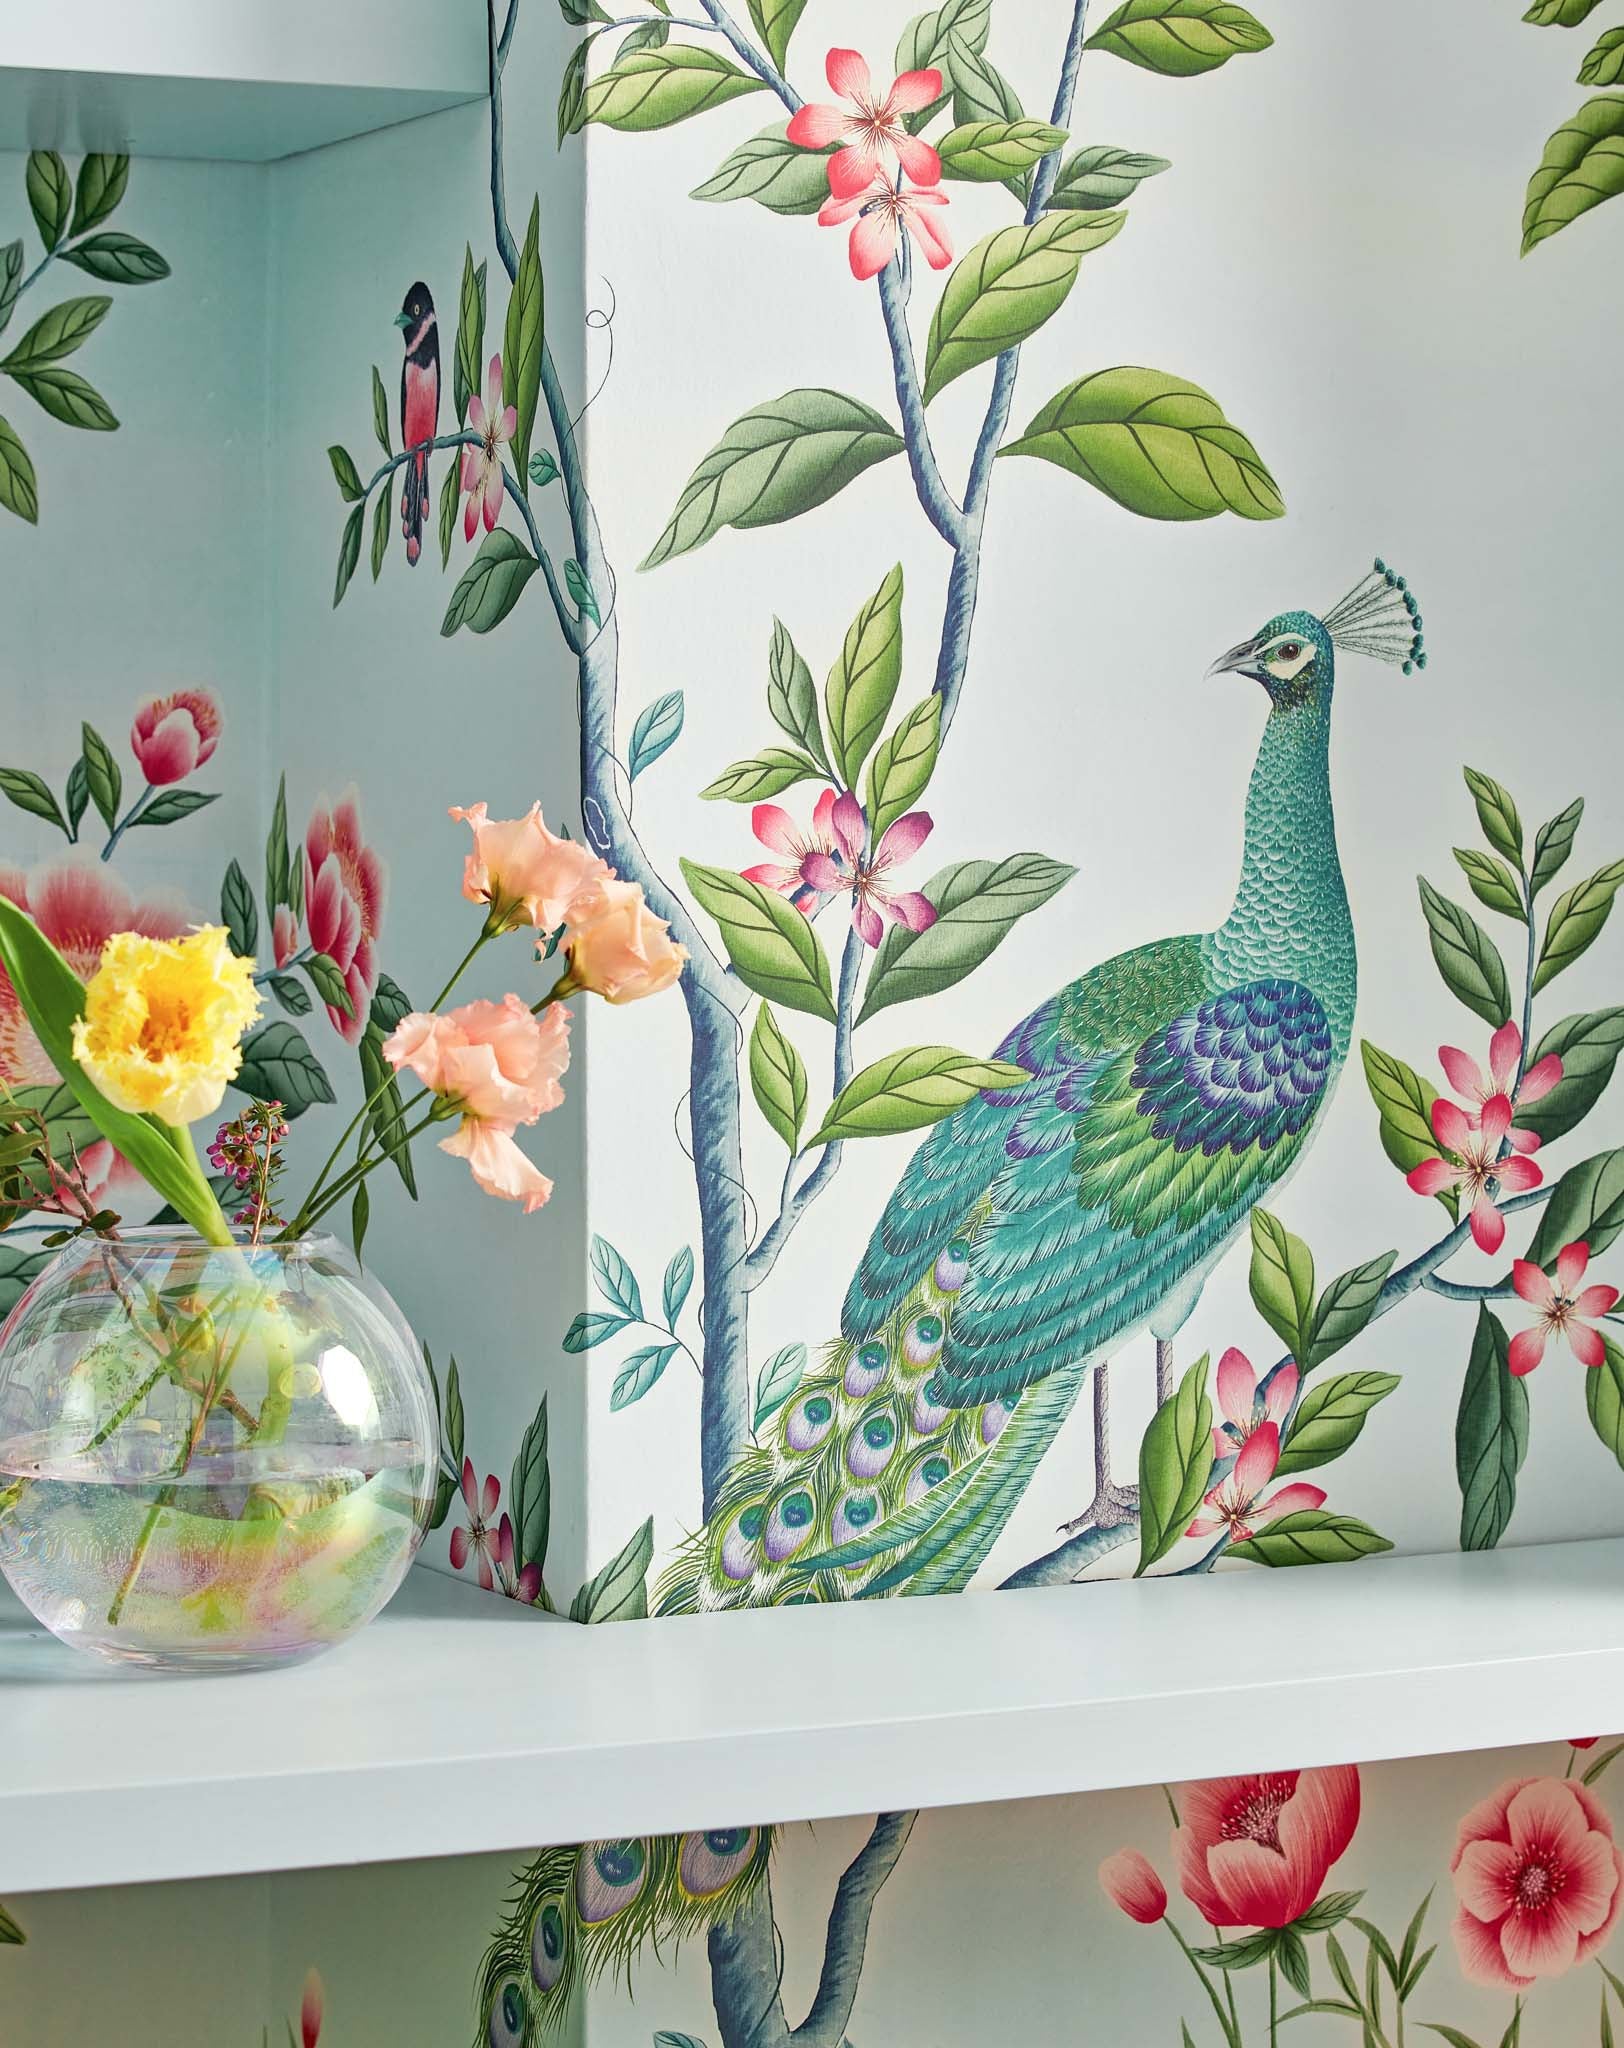 Chinoiserie wallpaper mural with peacock